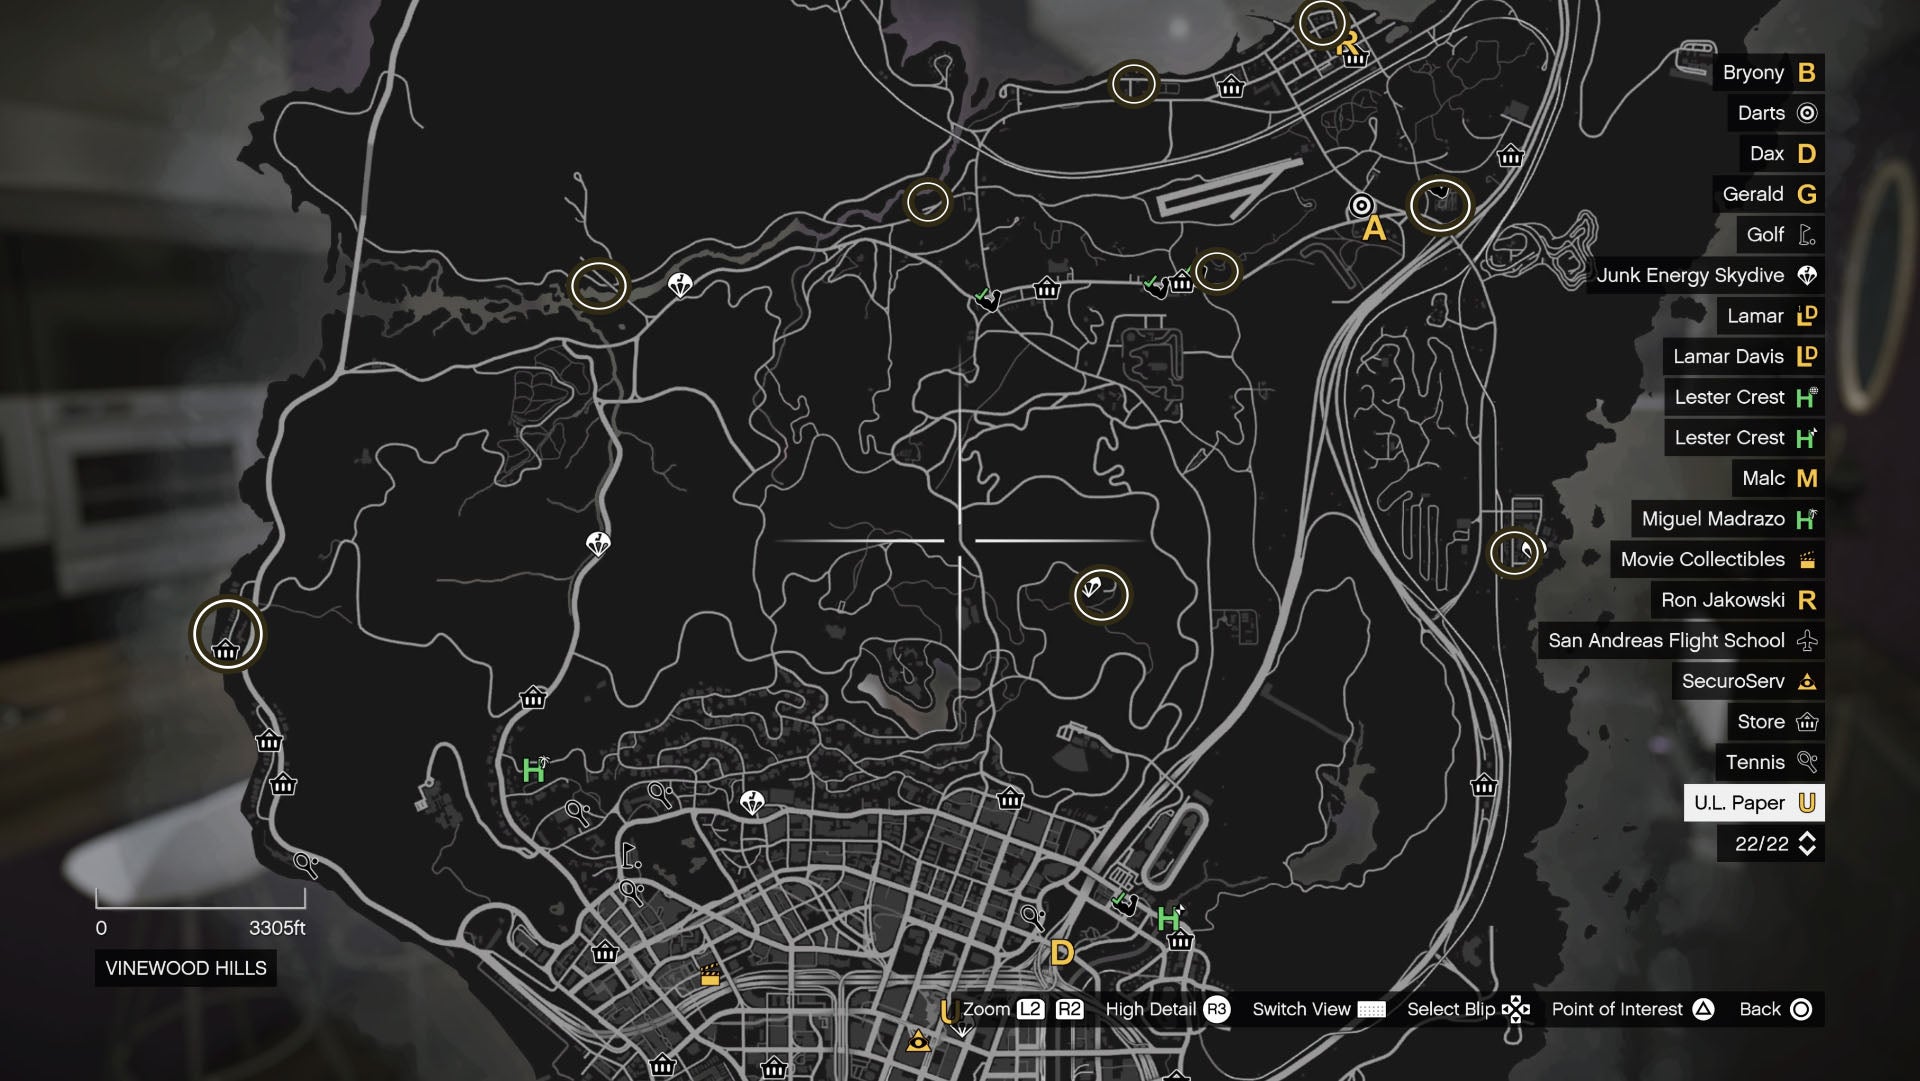 GTA Online, the middle section of the map showing the markers for the Gun Van.